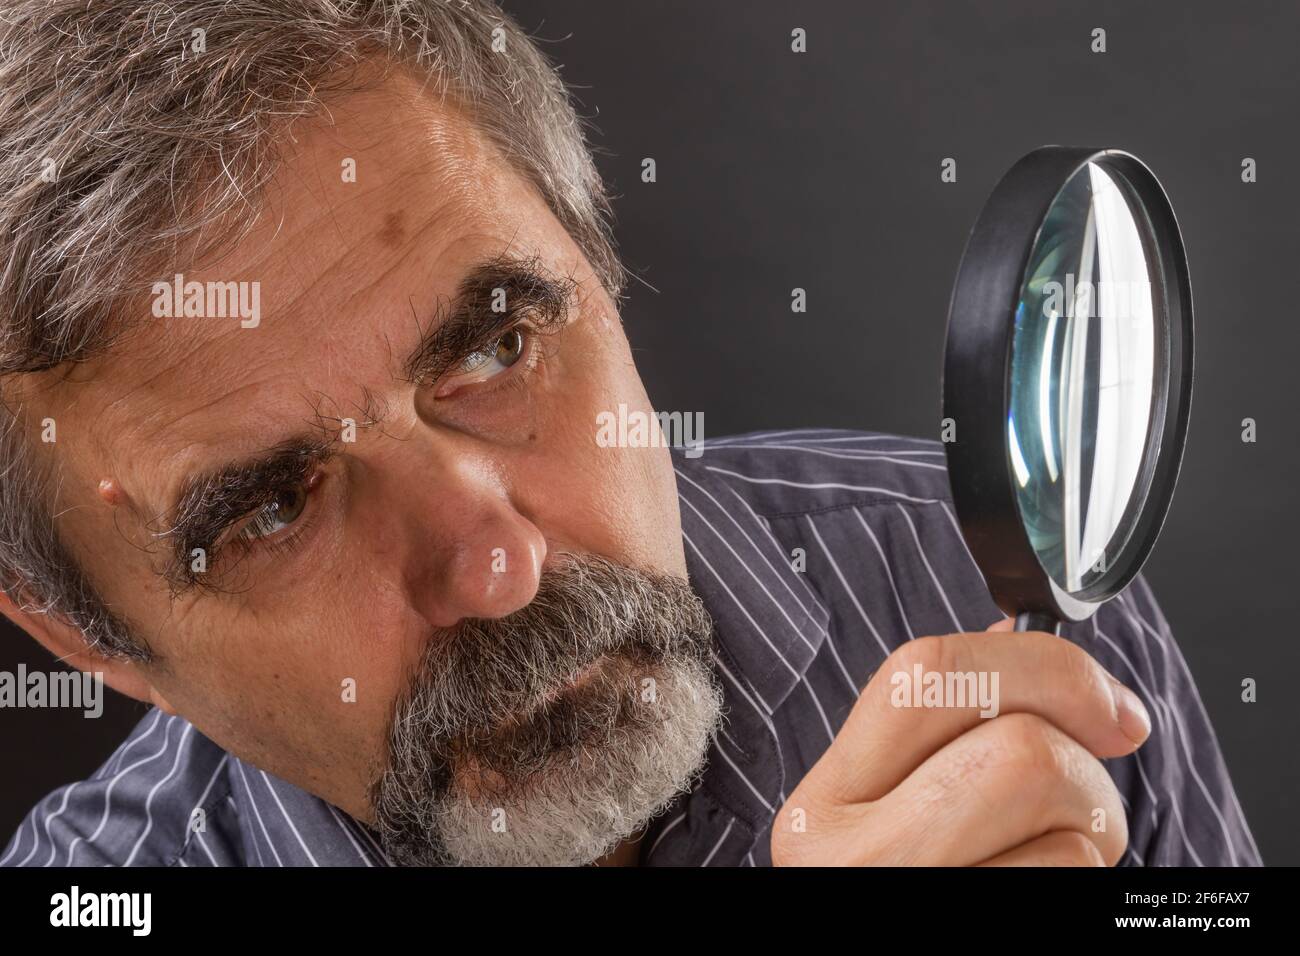 Elderly gray-haired man with a beard carefully examine something through a magnifying glass Stock Photo